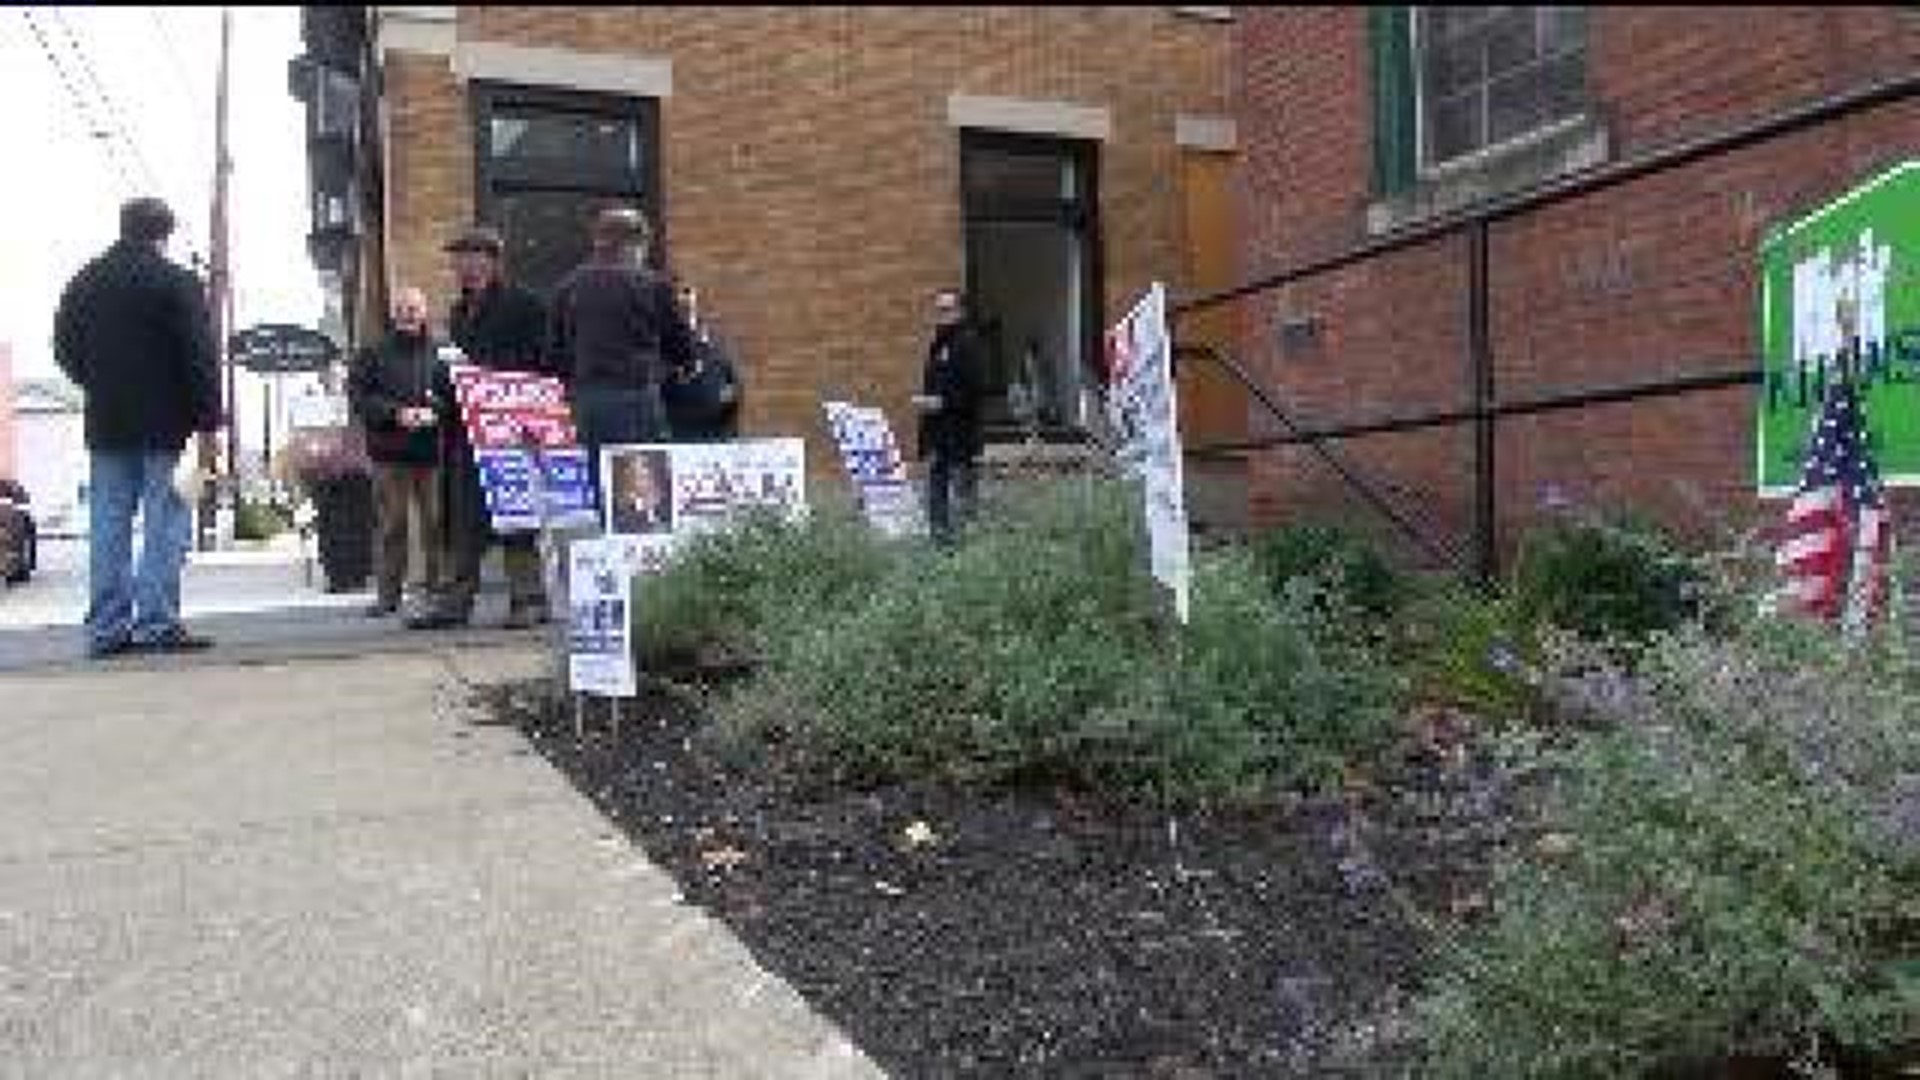 Low Voter Turnout In Pittston